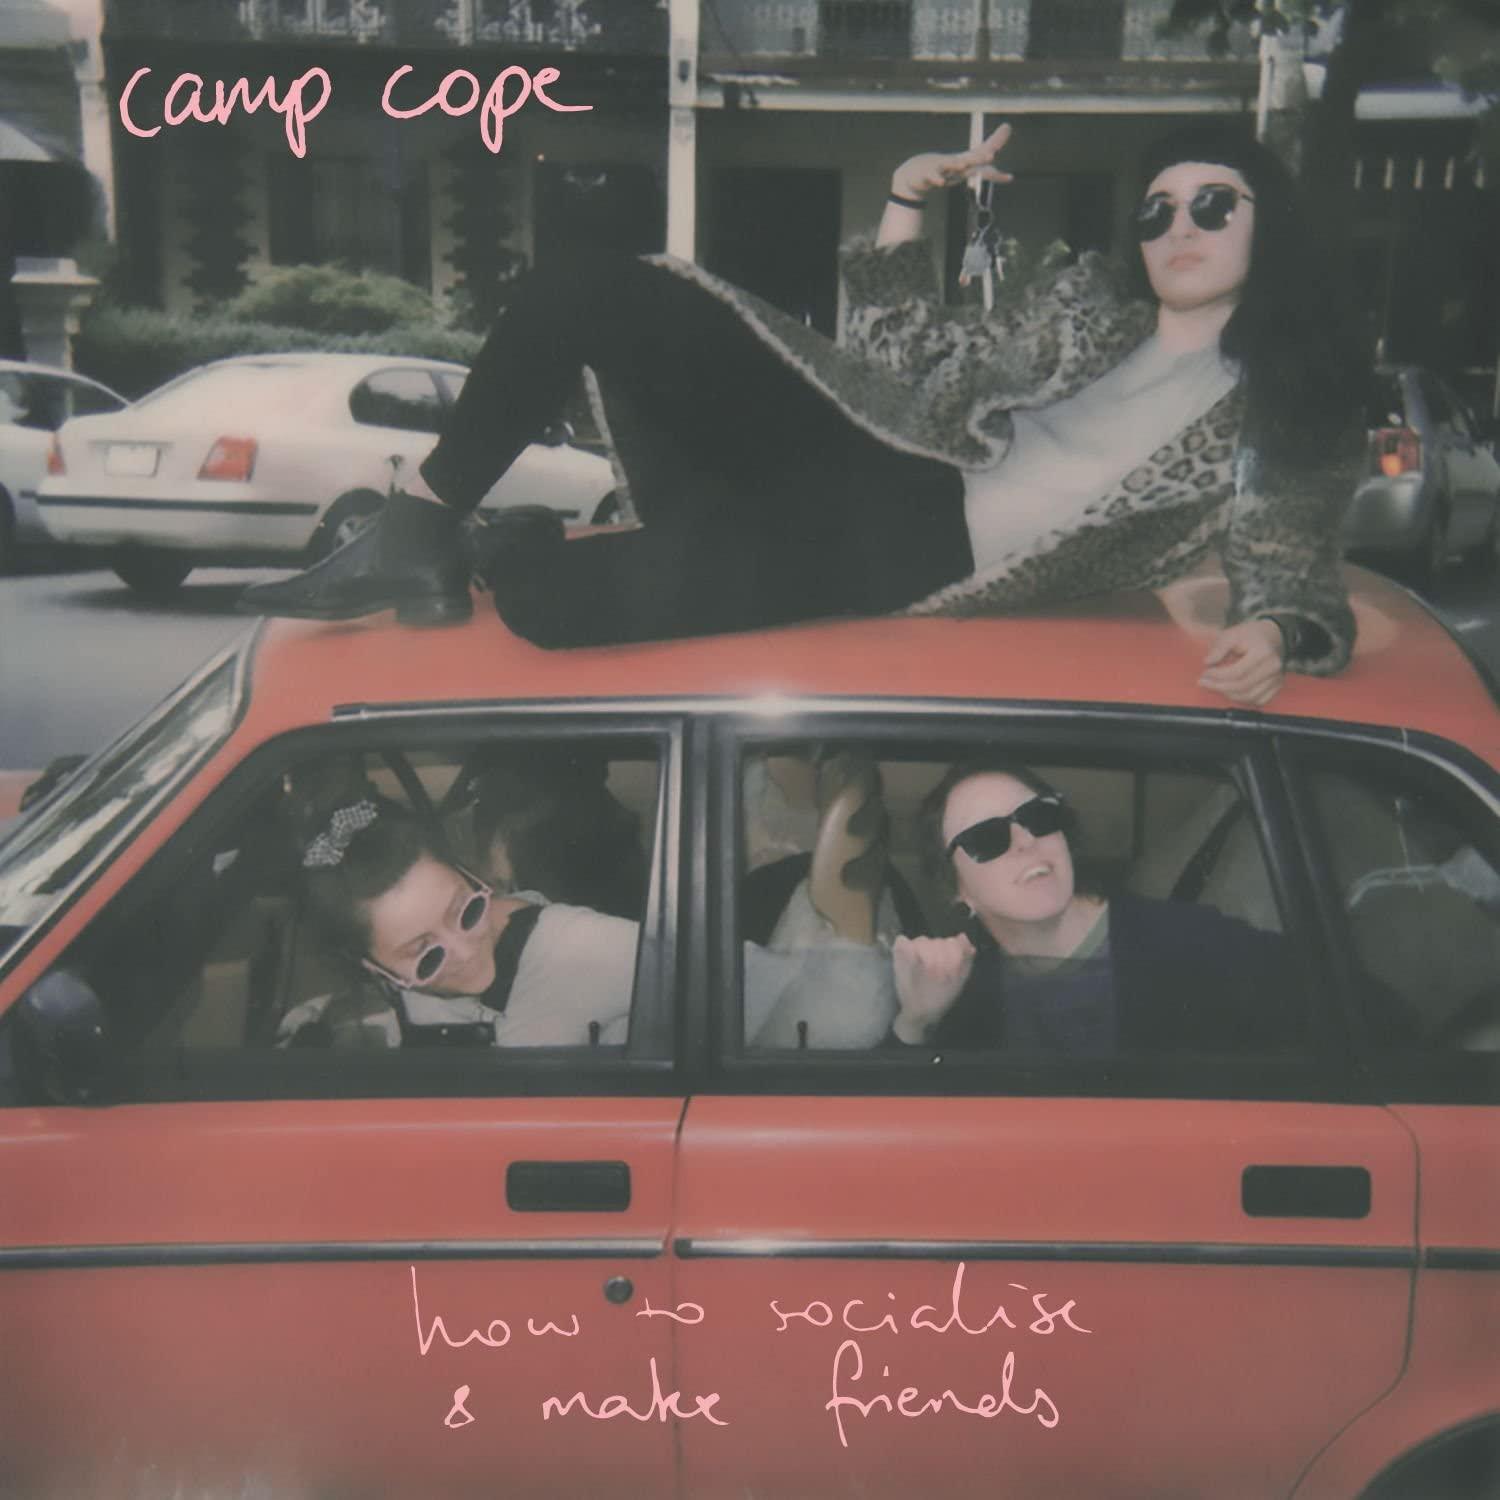 How to Socialise & Make Friends / Camp Cope